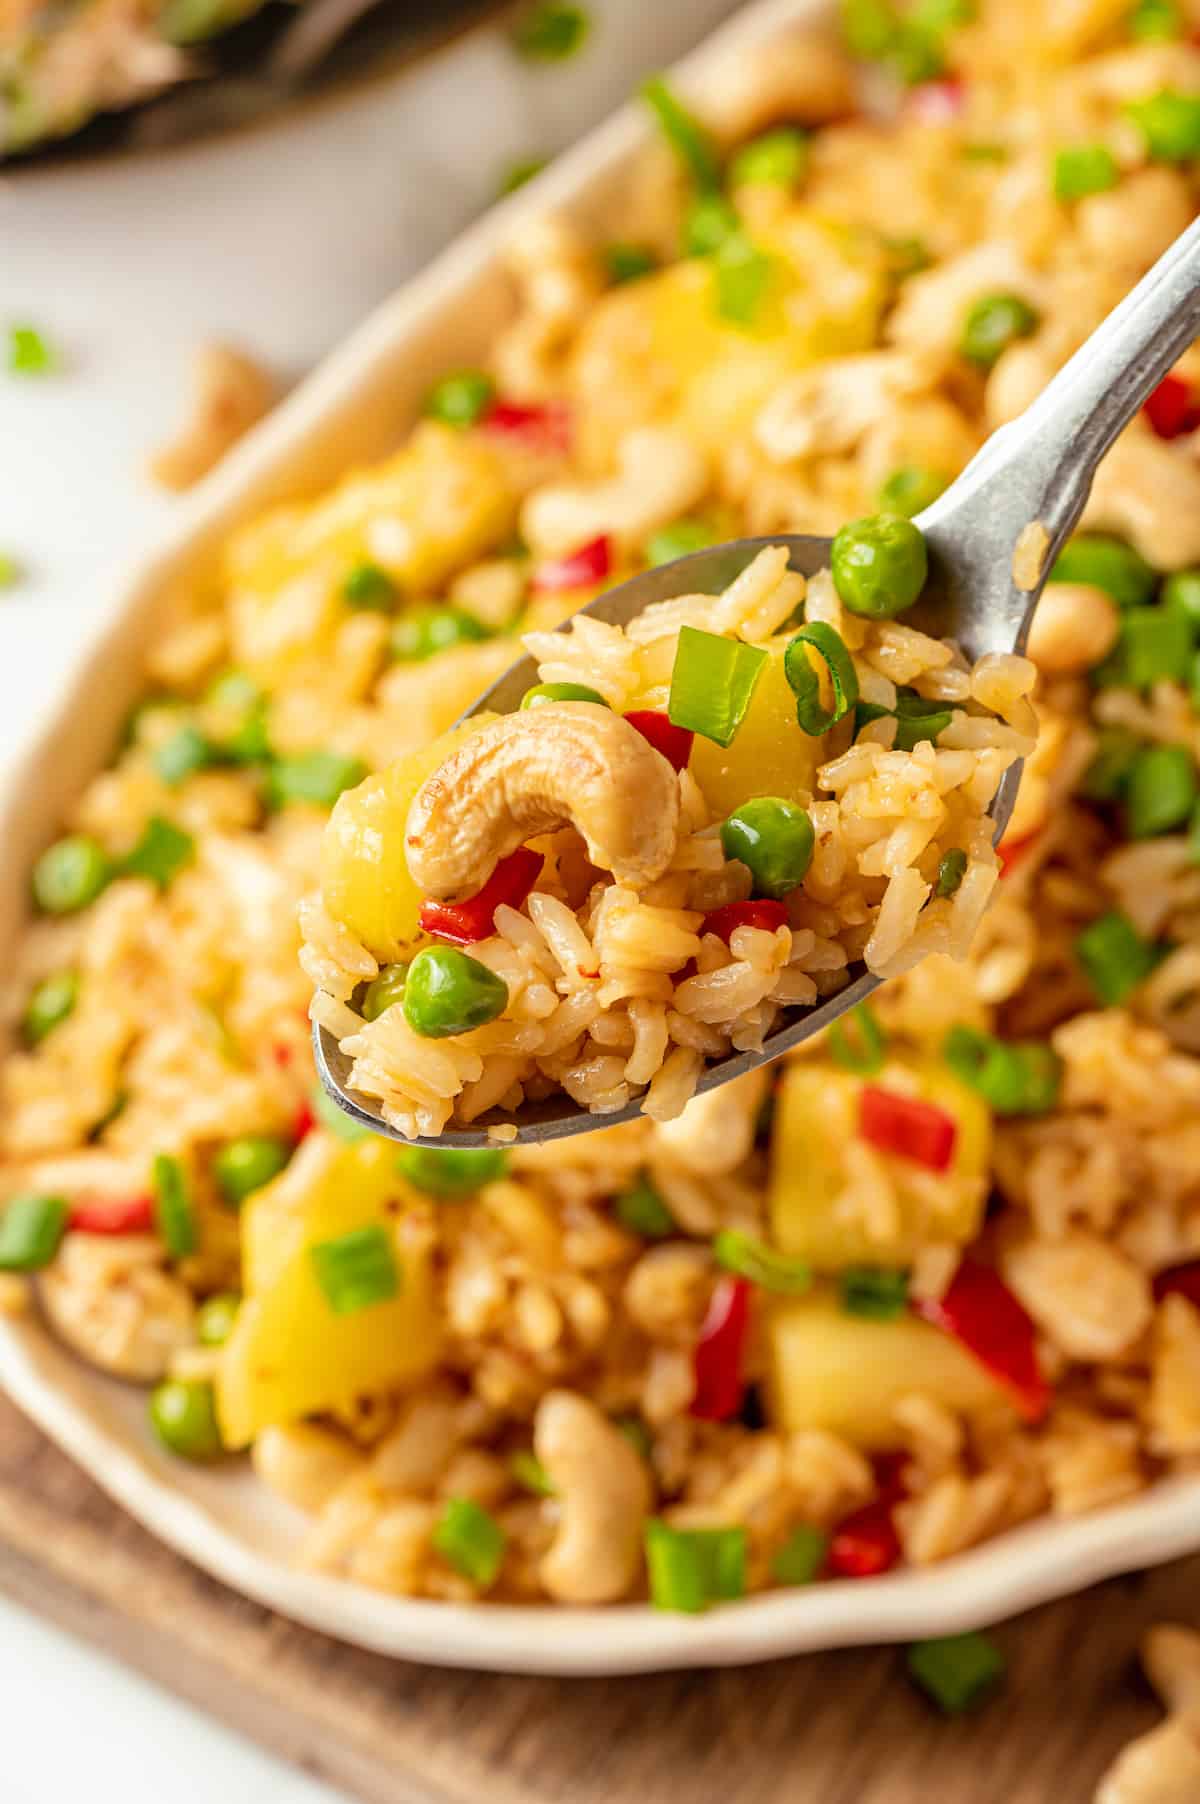 Spoonful of pineapple fried rice held over platter of rice